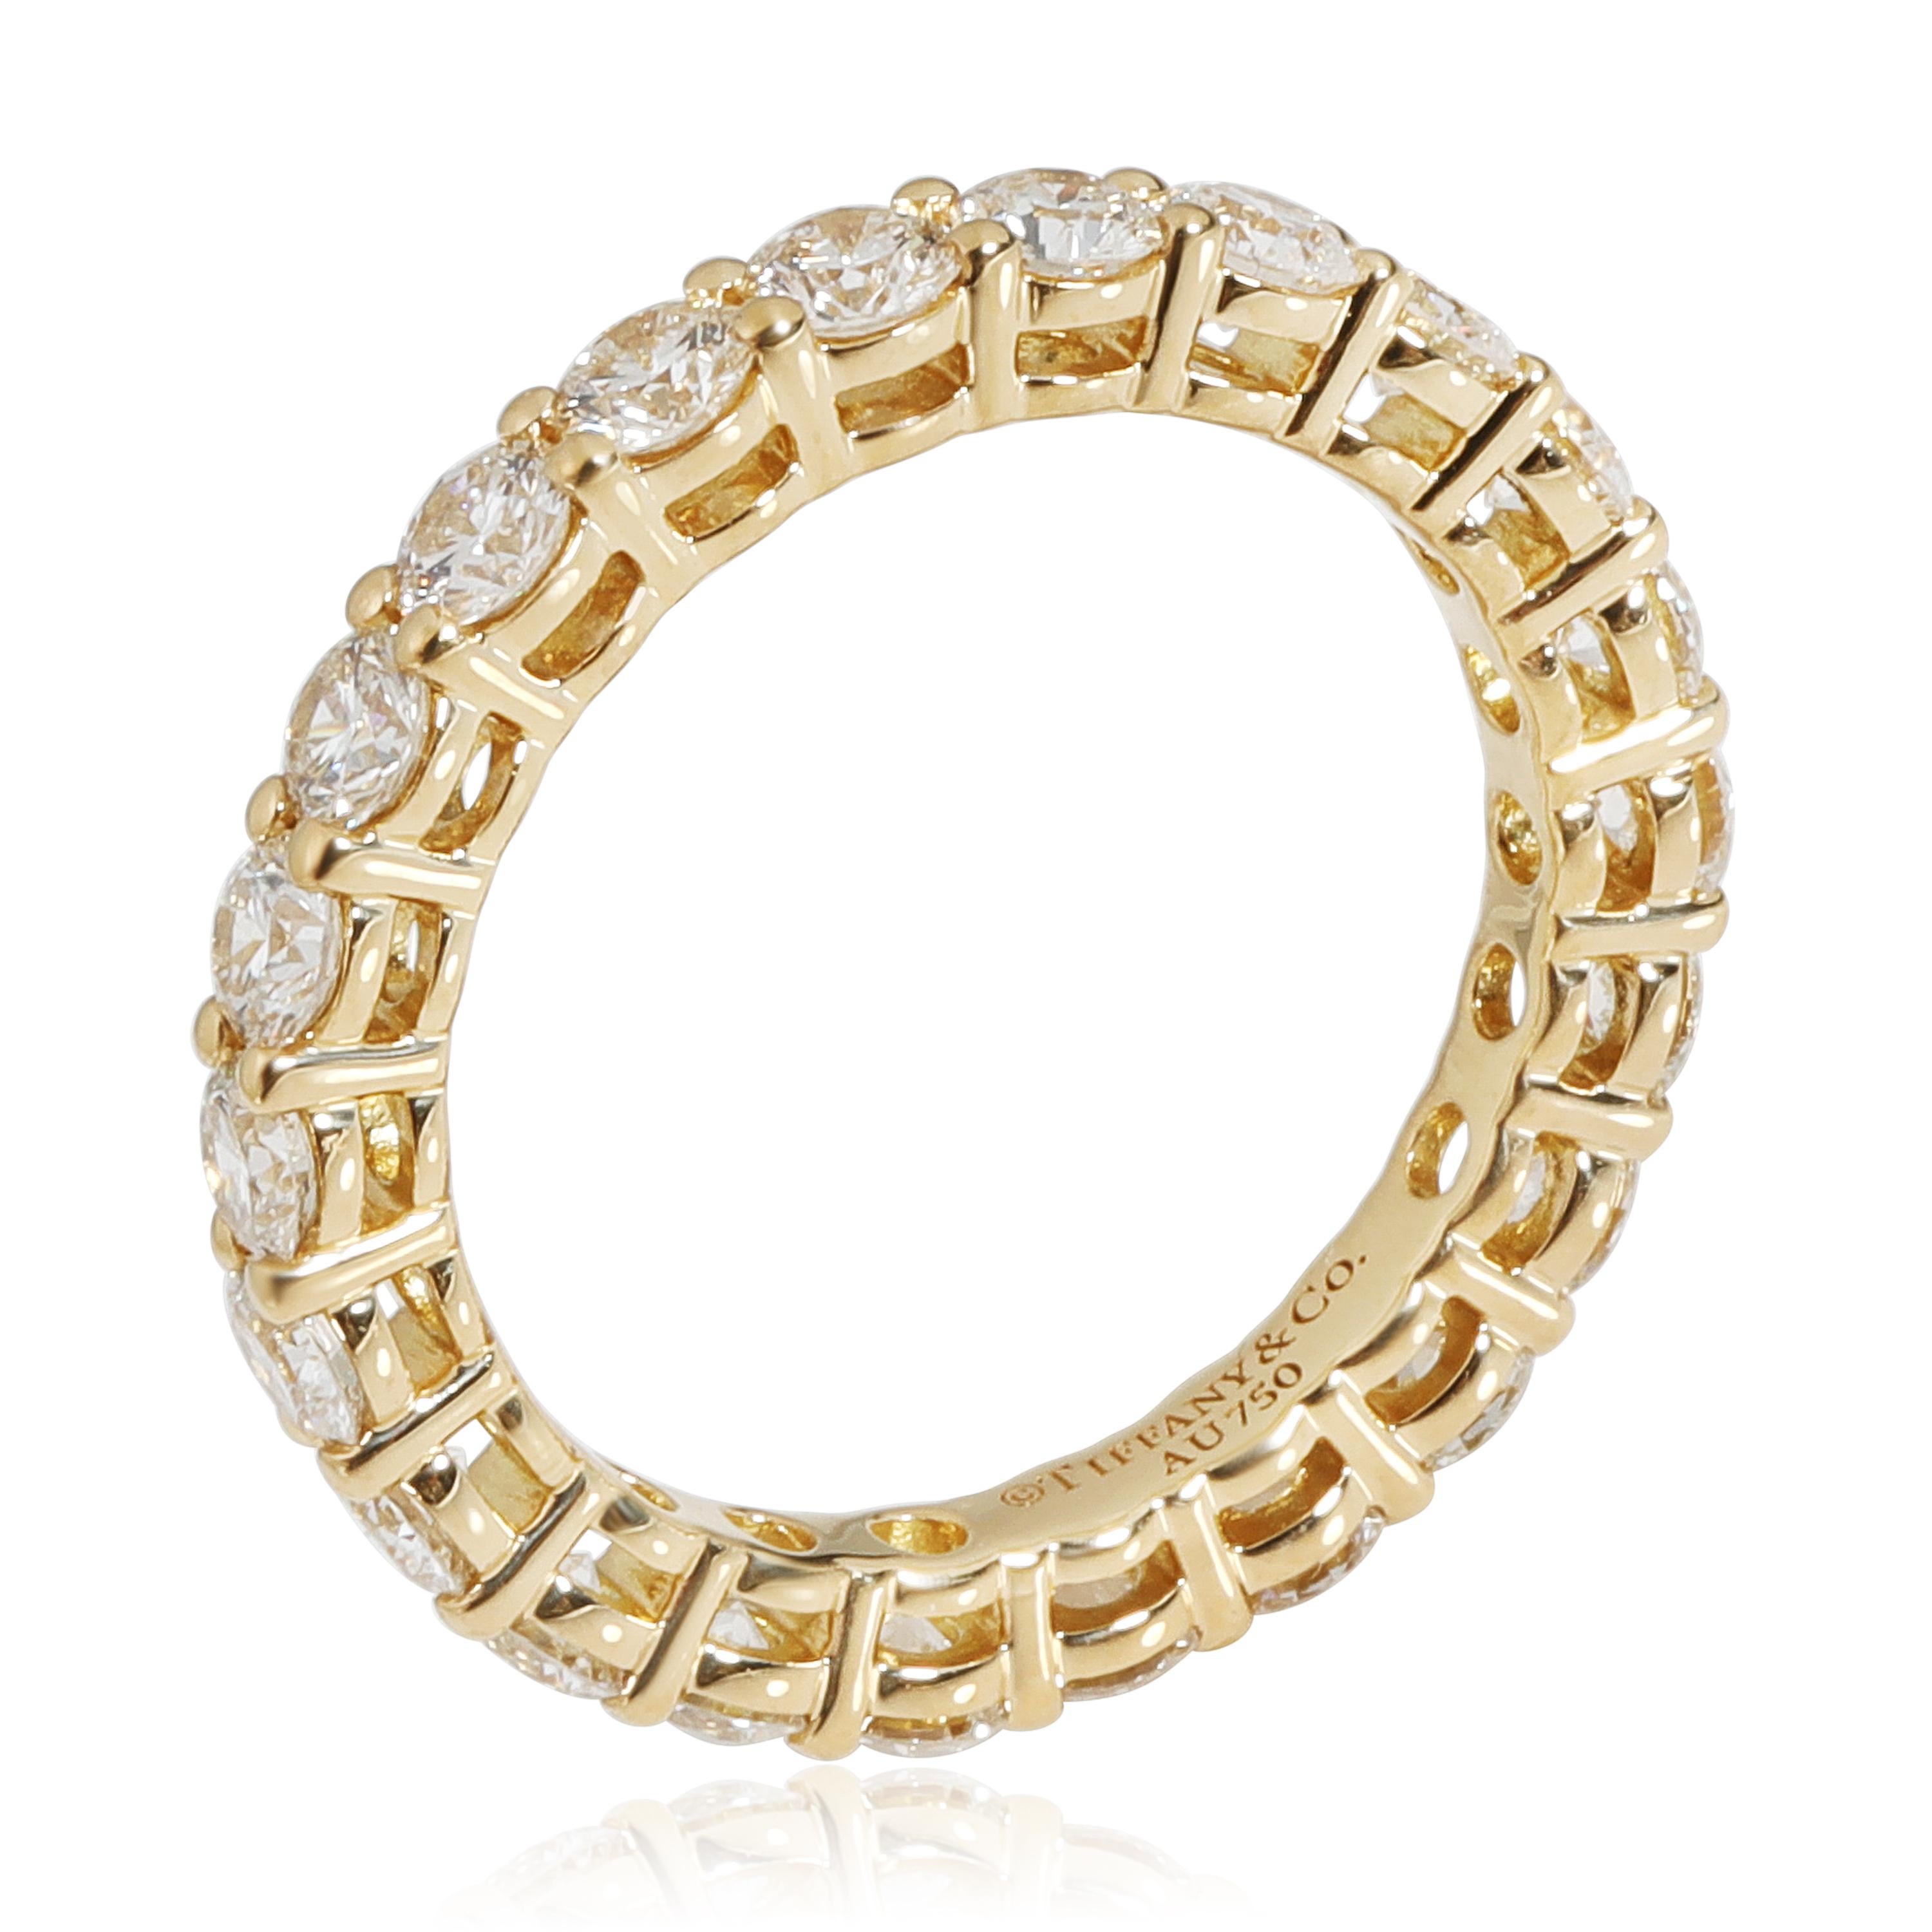 Tiffany & Co. Embrace Diamond Eternity Band in 18k Yellow Gold 1.80 CTW

PRIMARY DETAILS
SKU: 116873
Listing Title: Tiffany & Co. Embrace Diamond Eternity Band in 18k Yellow Gold 1.80 CTW
Condition Description: Retails for 10,100 USD. In excellent